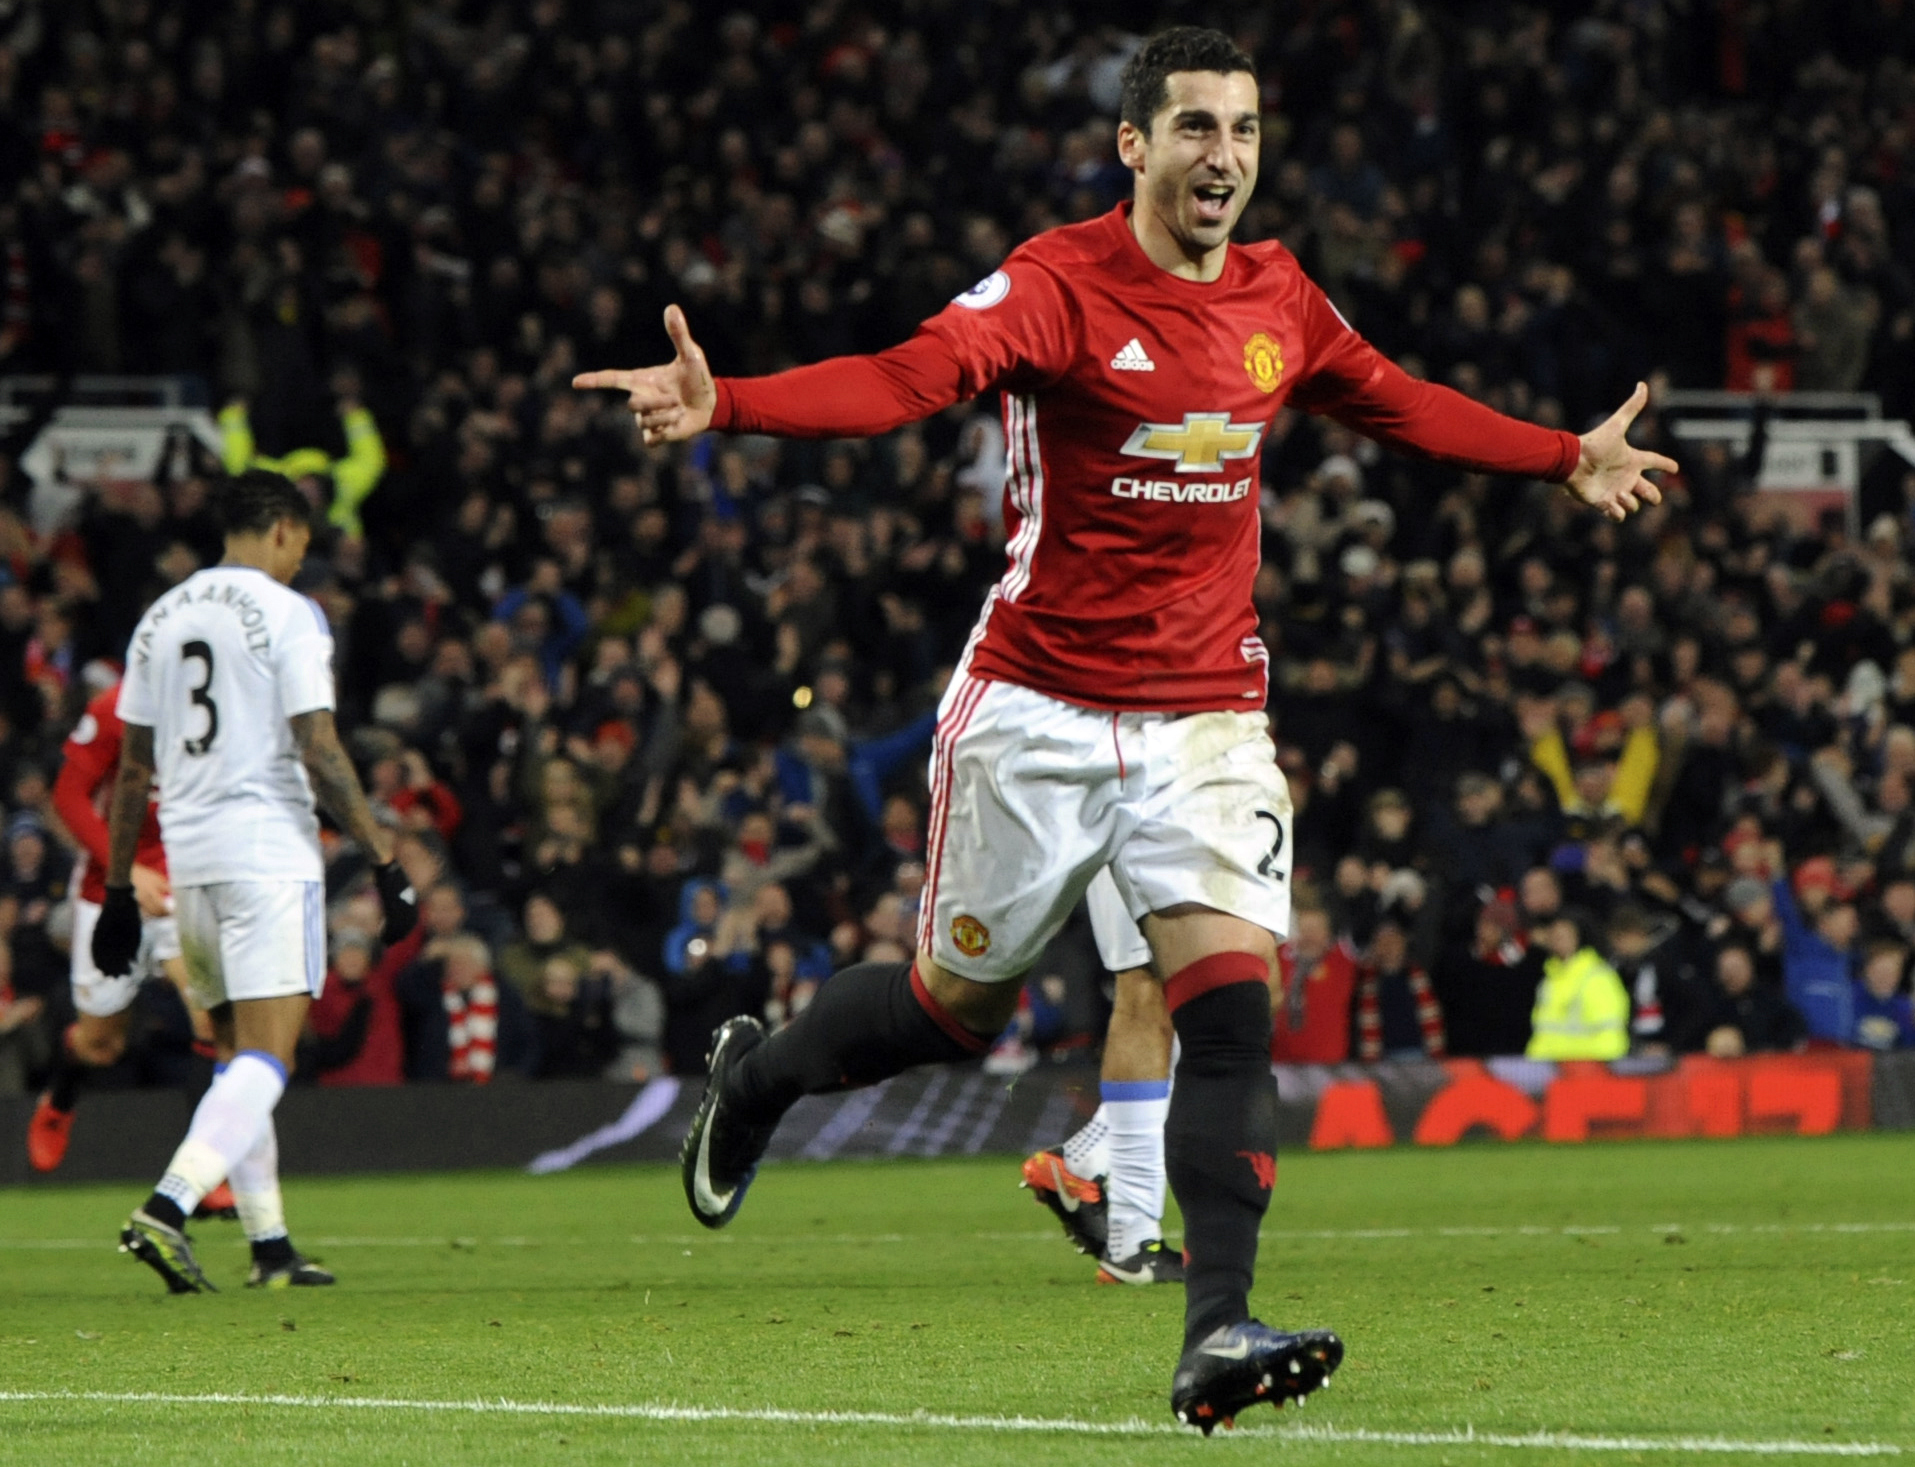 Manchester United's Henrikh Mkhitaryan celebrated after scoring his side's third goal during the English Premier League soccer match between Manchester United and Sunderland at Old Trafford in Manchester, England, on Monday.